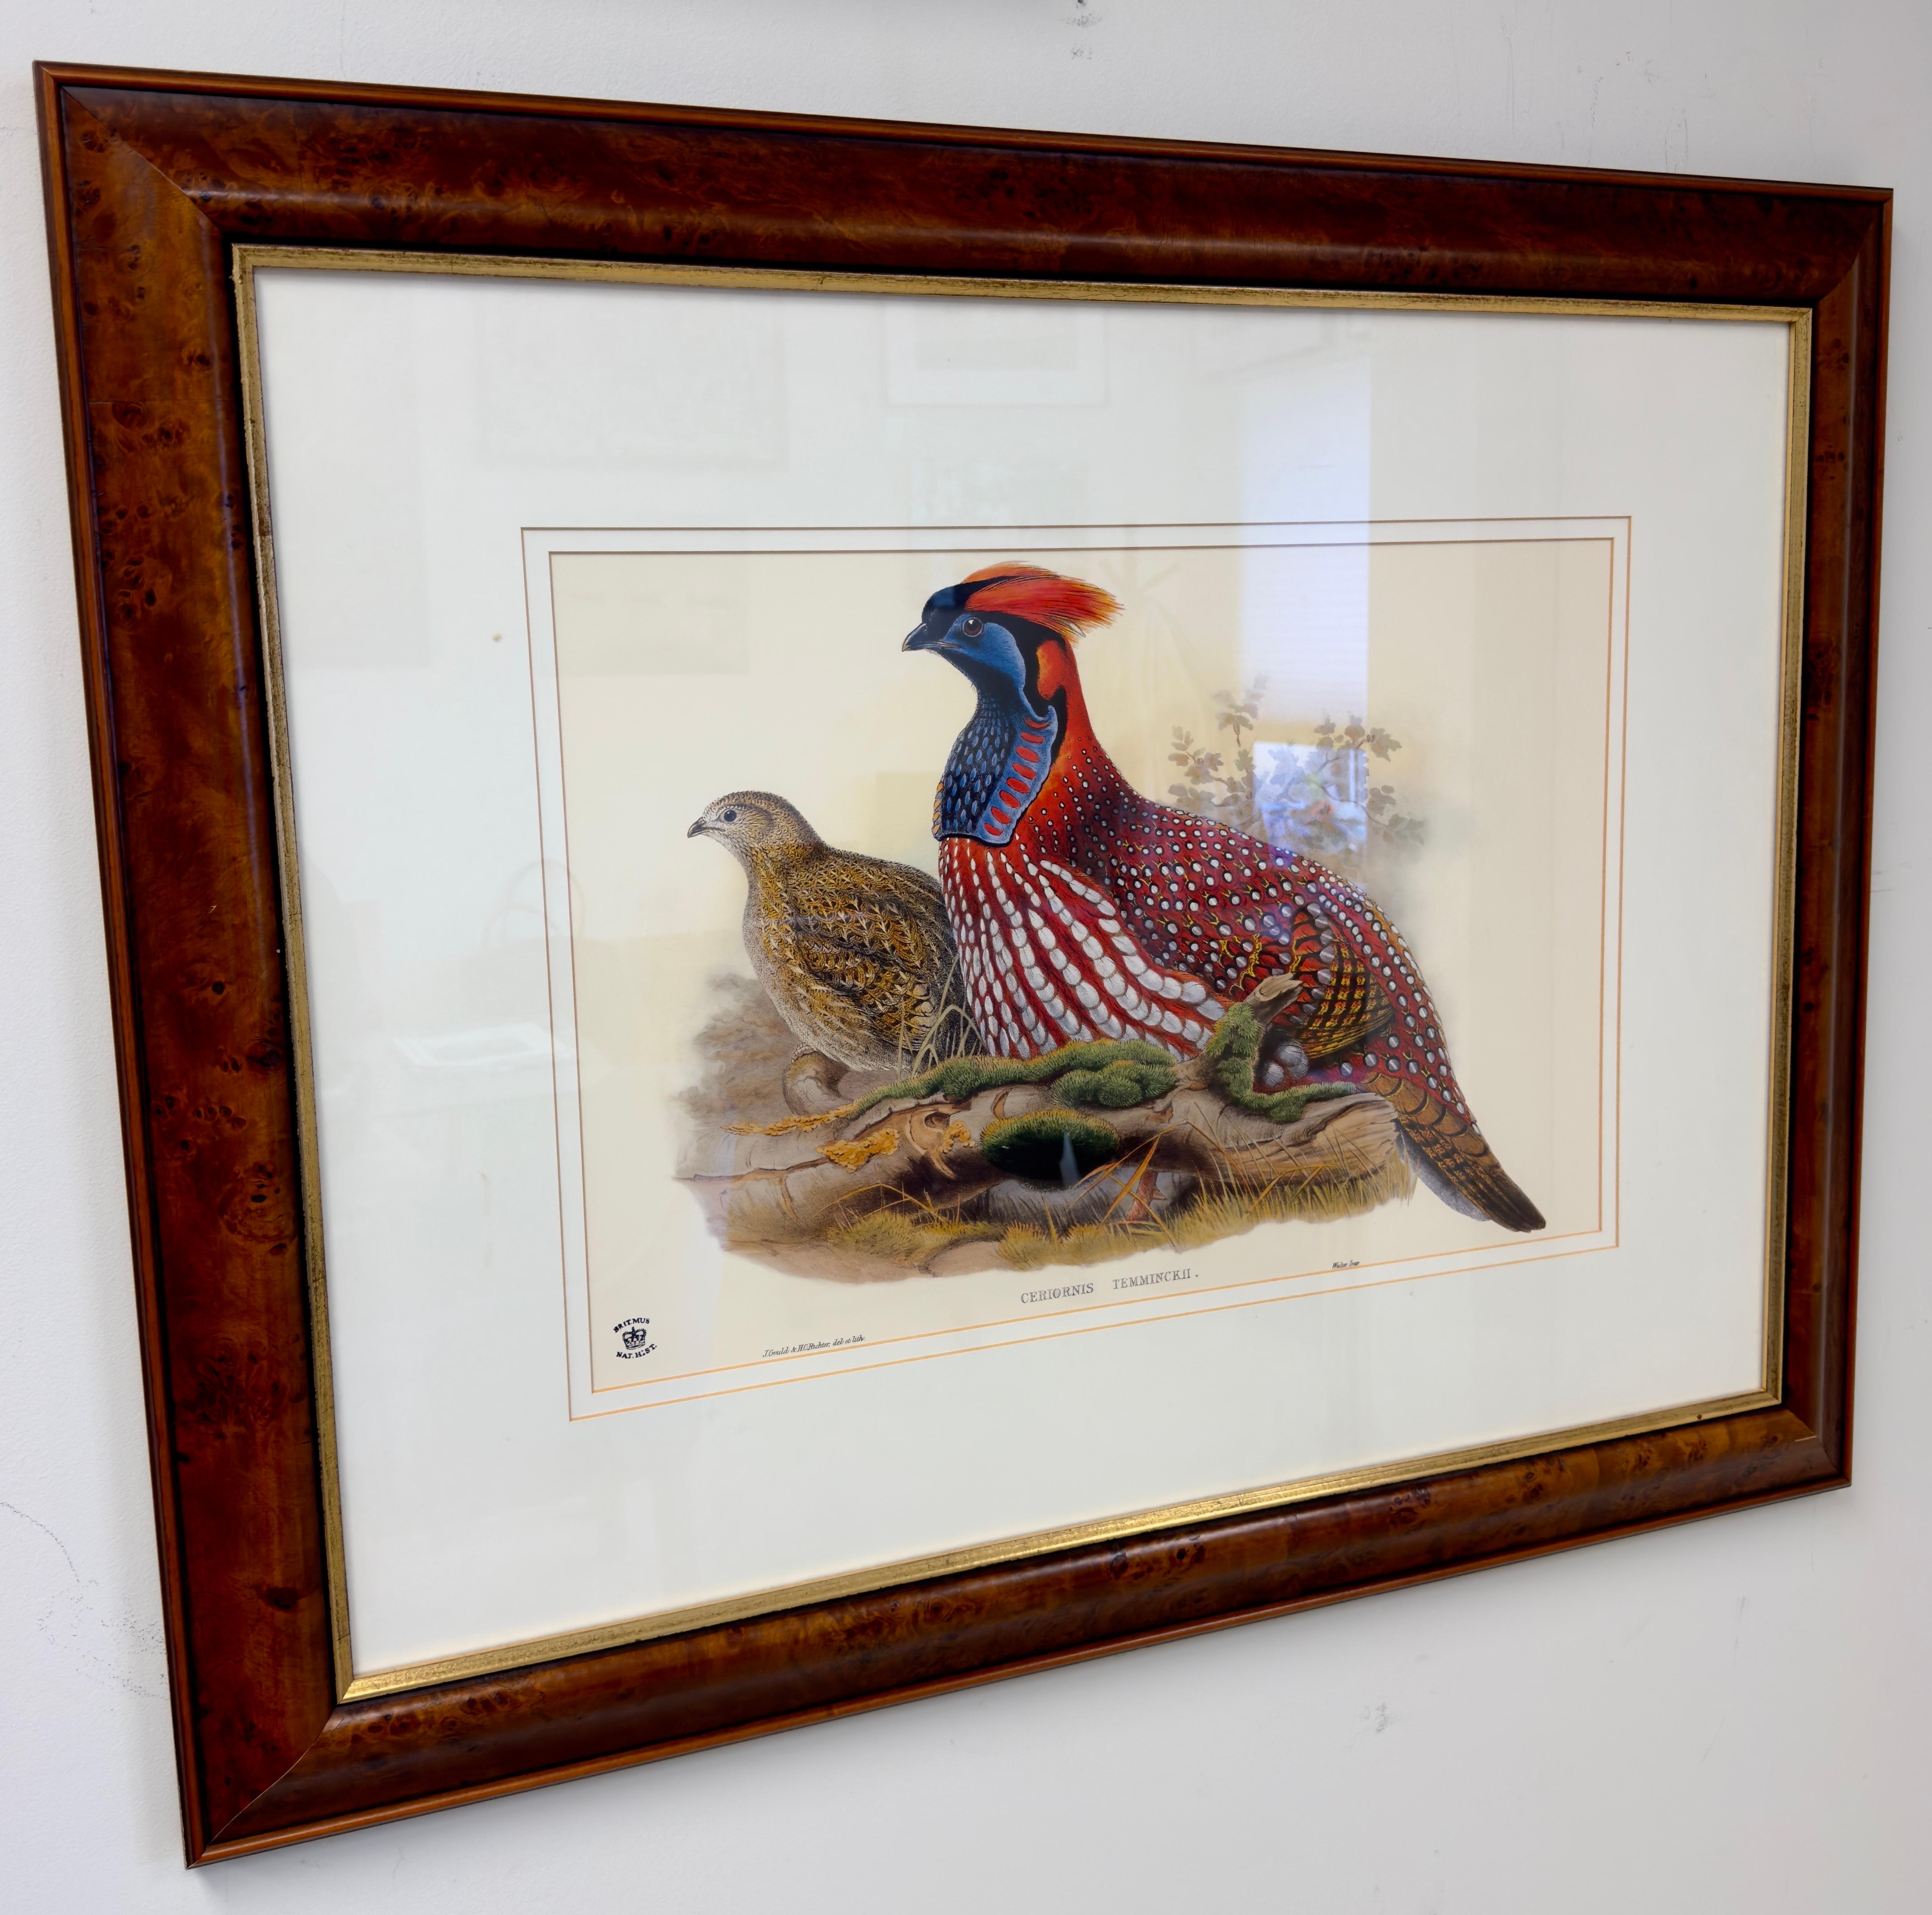 A large print of  John Gould & Henry Constantine Richter of Temminck's Tragopan from his published book 